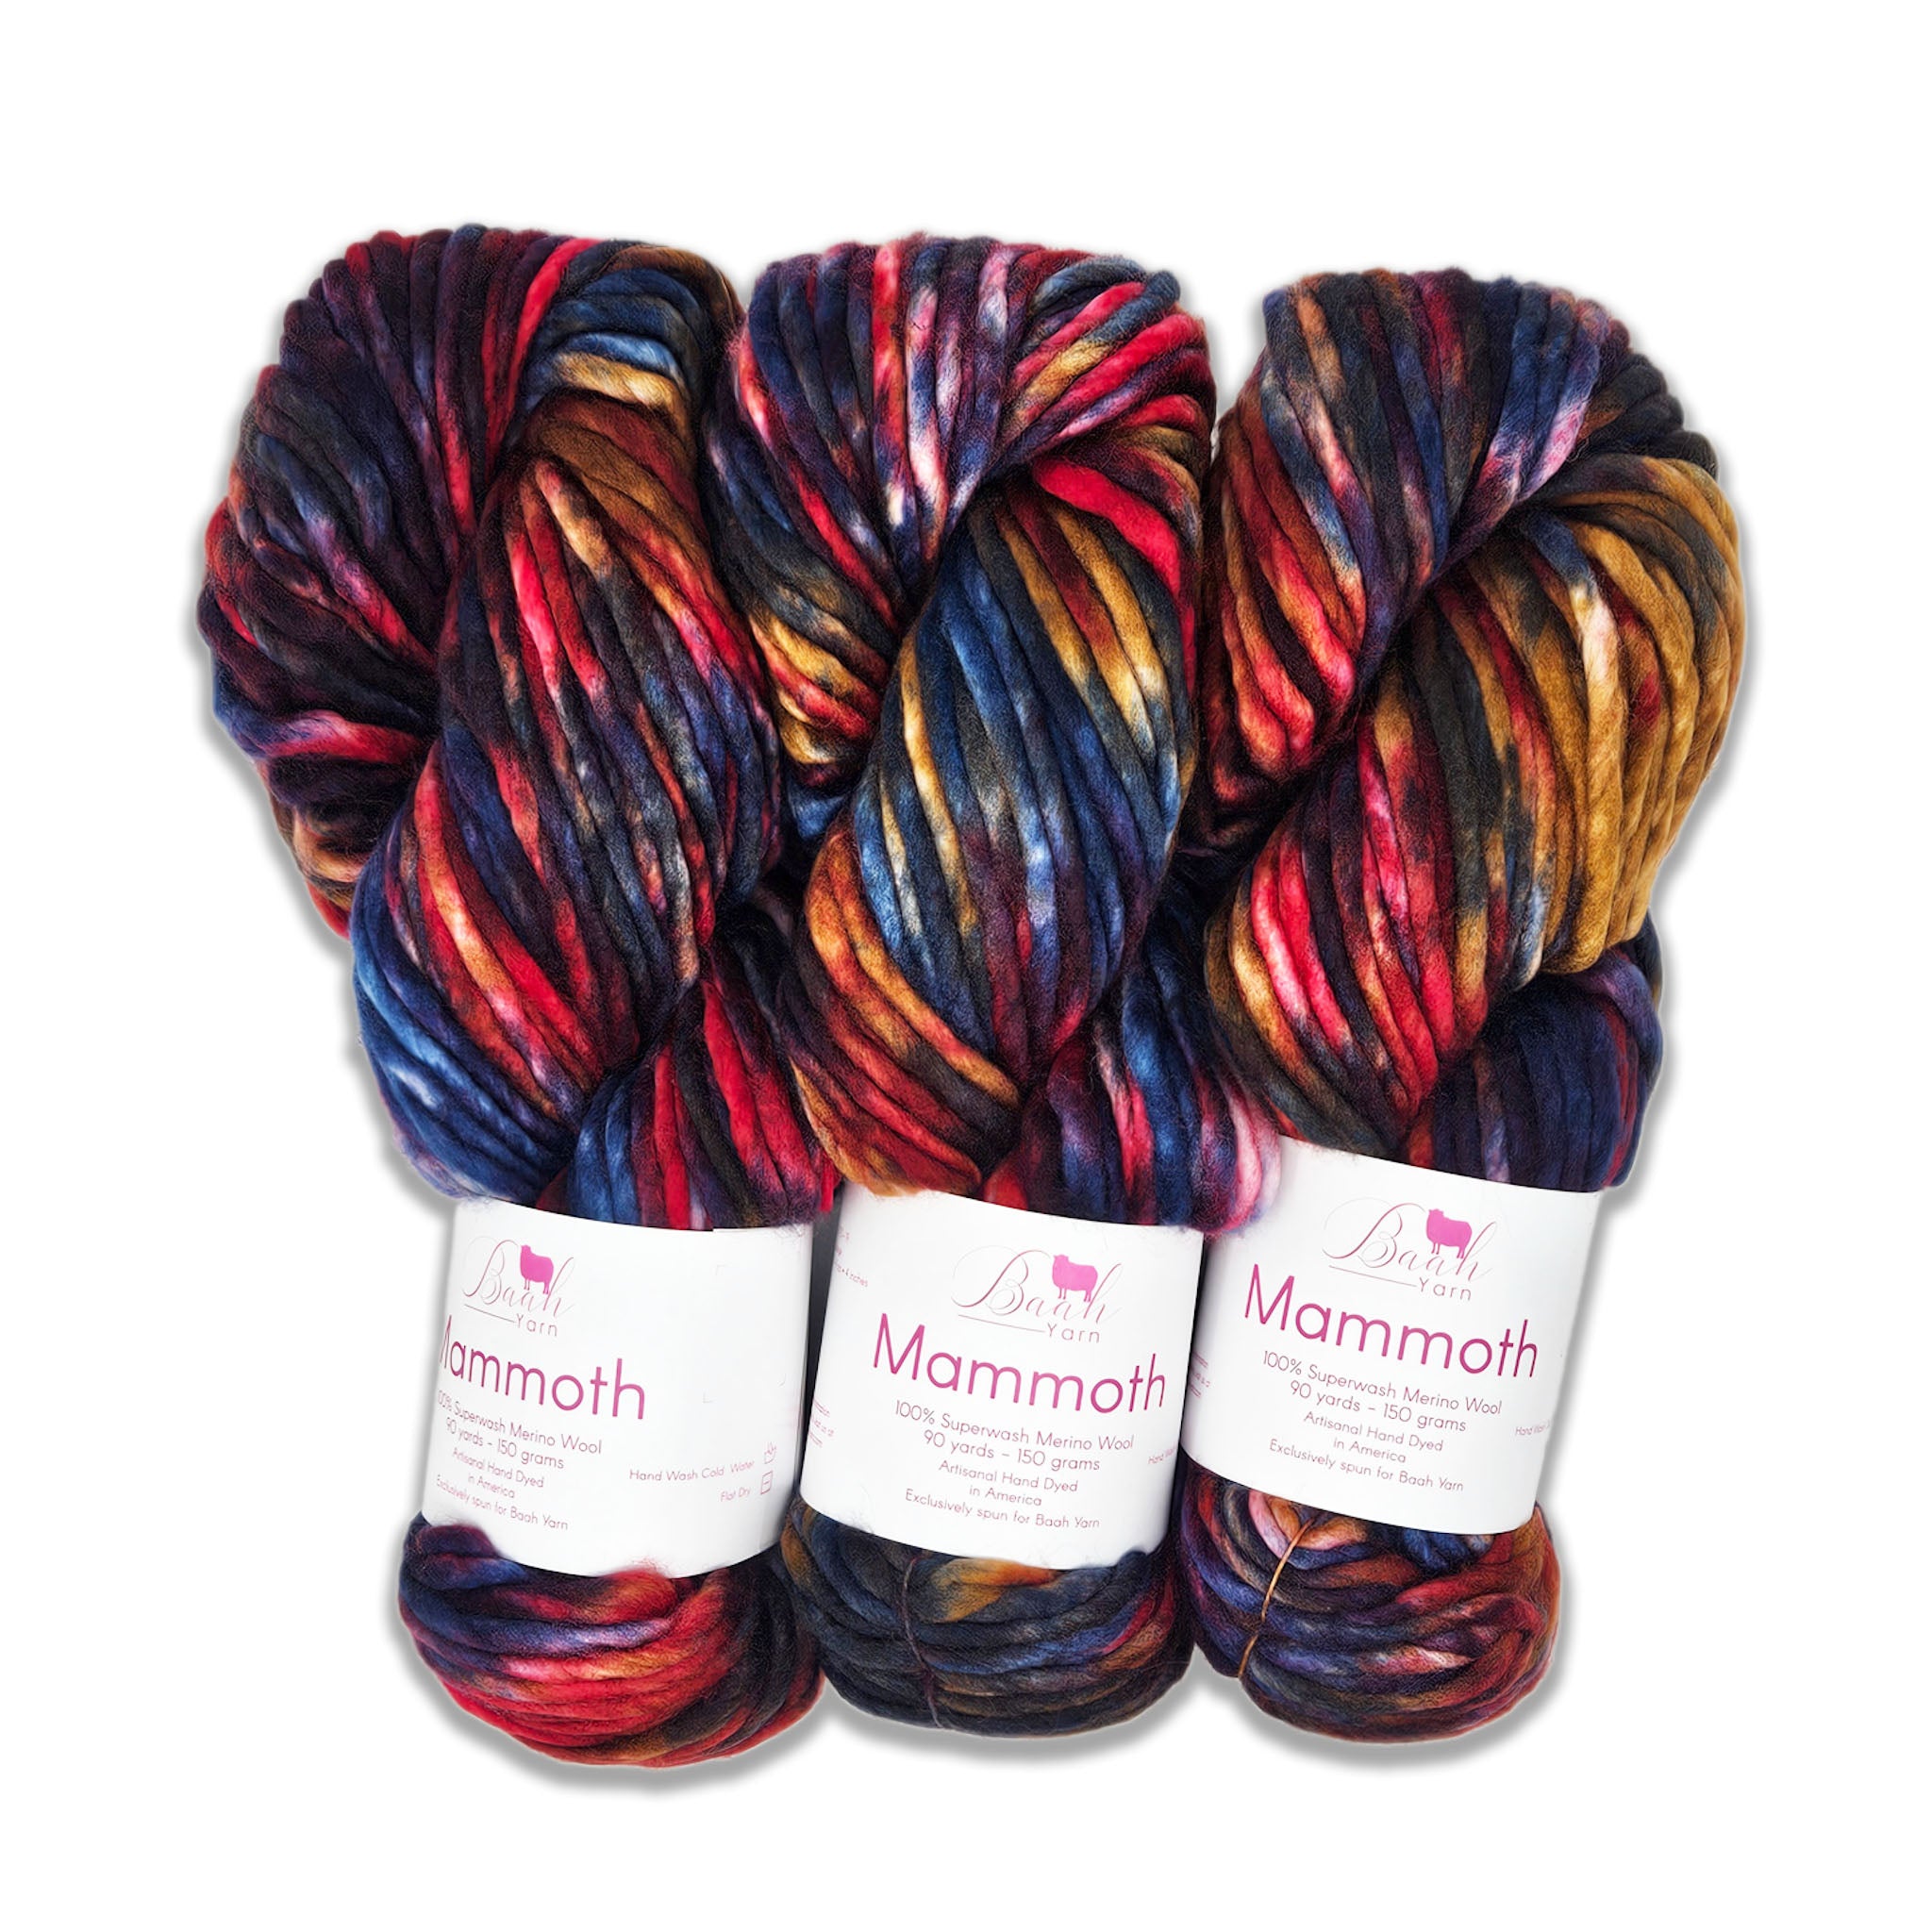 Baah Yarn Mammoth - Get it While It's Hot!